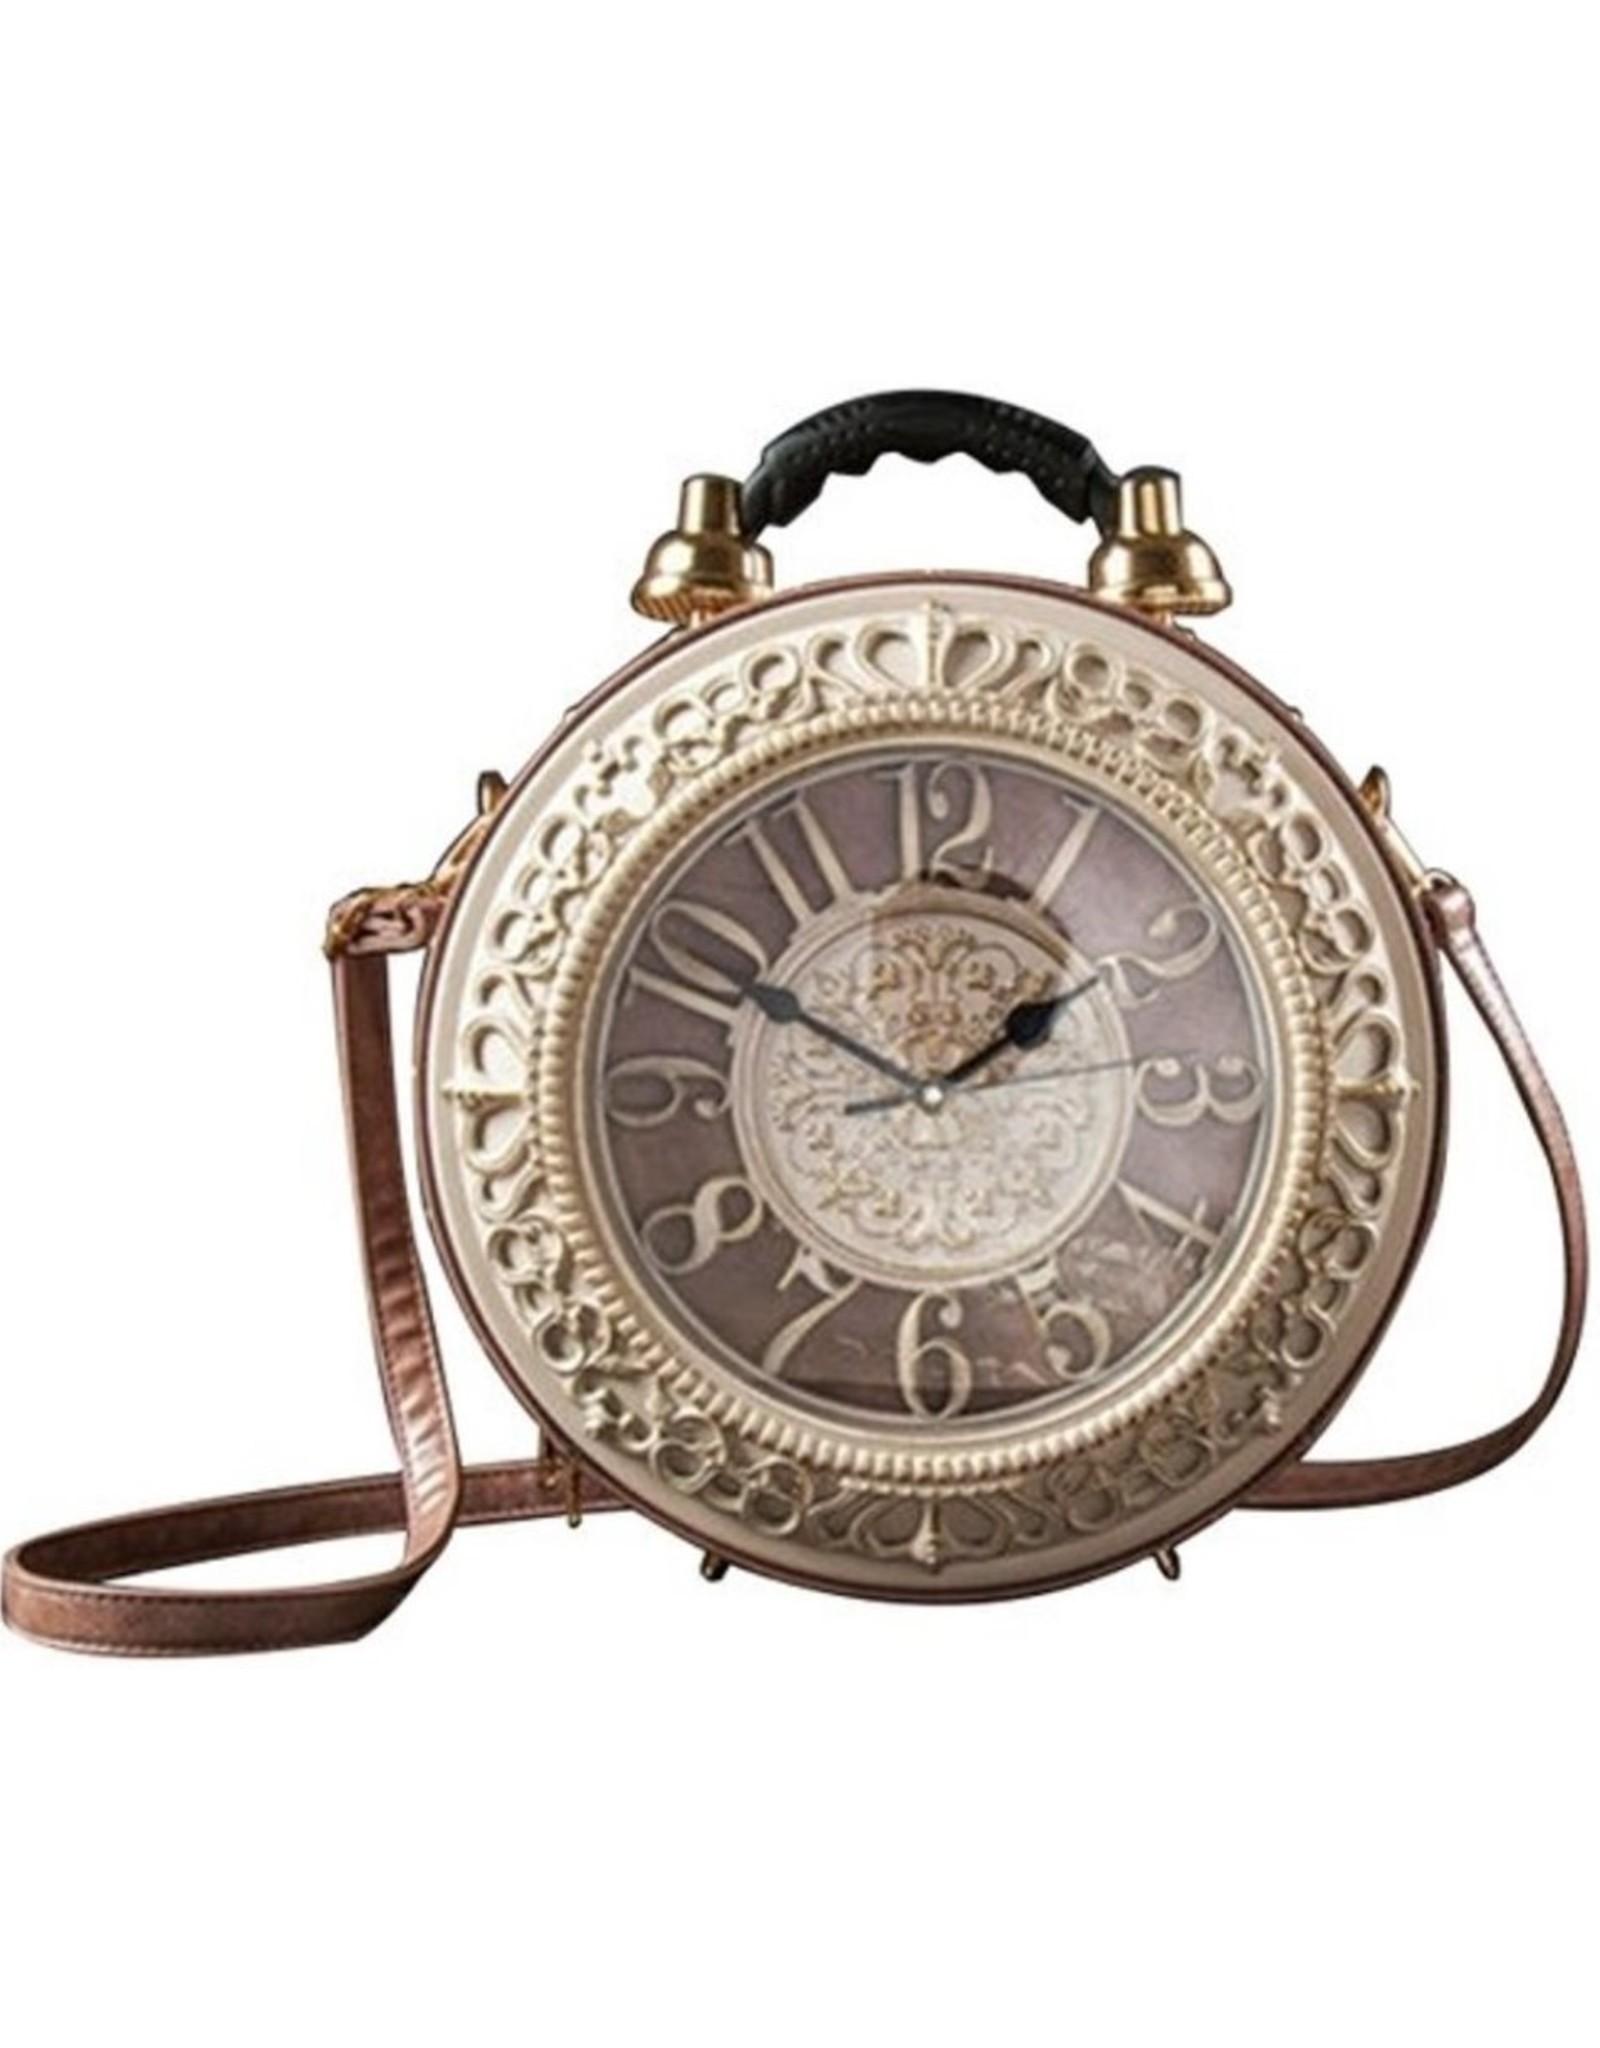 Magic Bags Fantasy bags - Clock bag with Working Clock Vintage Old pink large